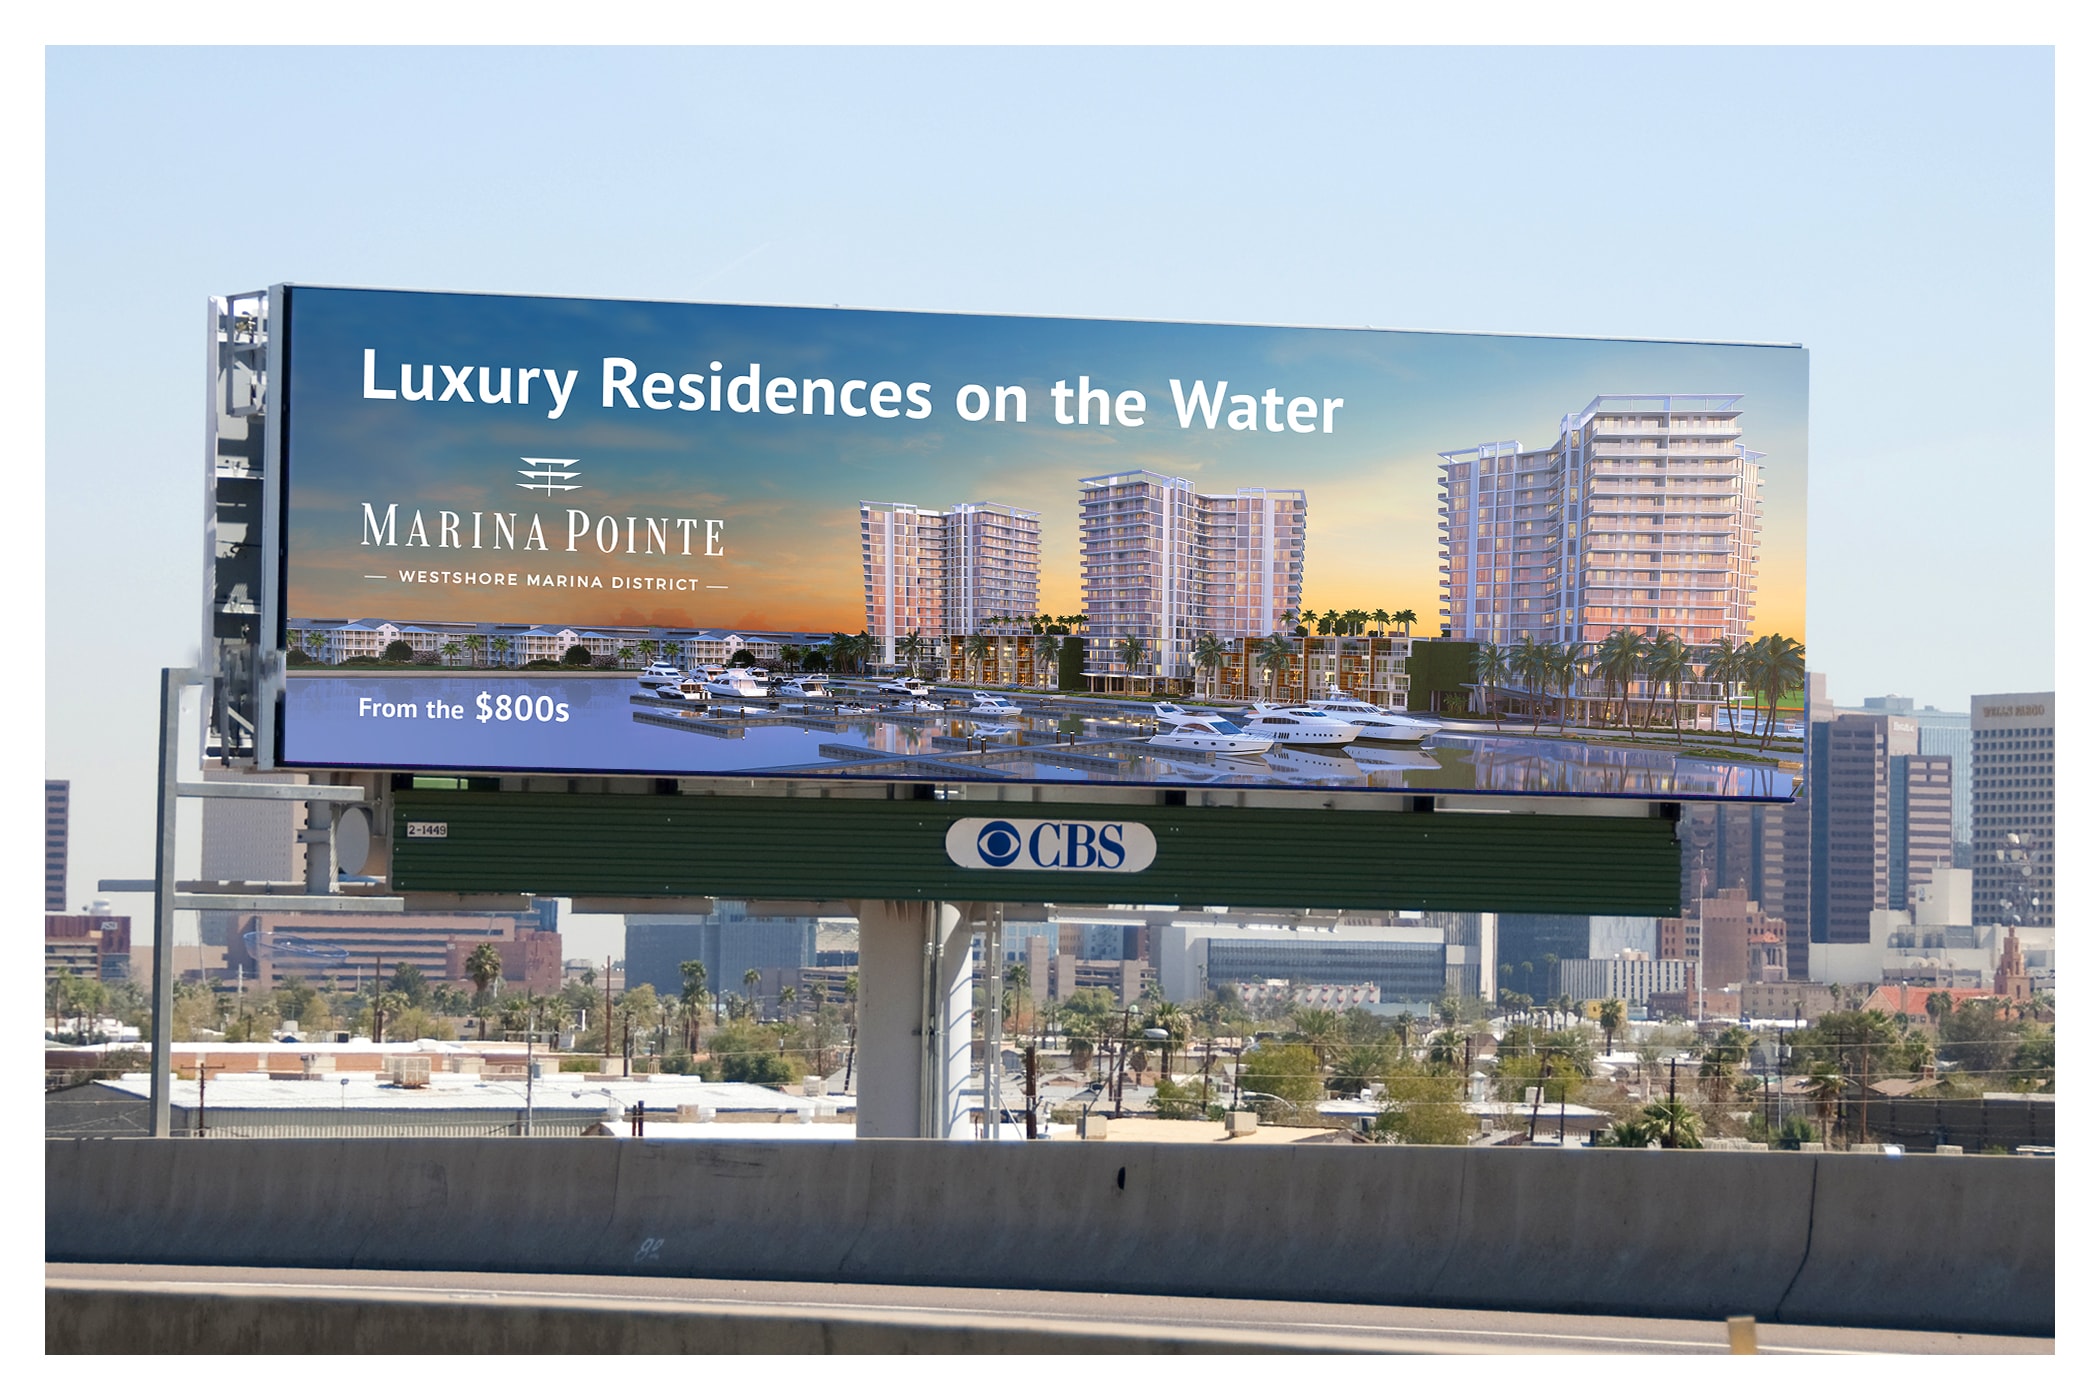 Luxury Residences on the Water billboard for Marina Pointe